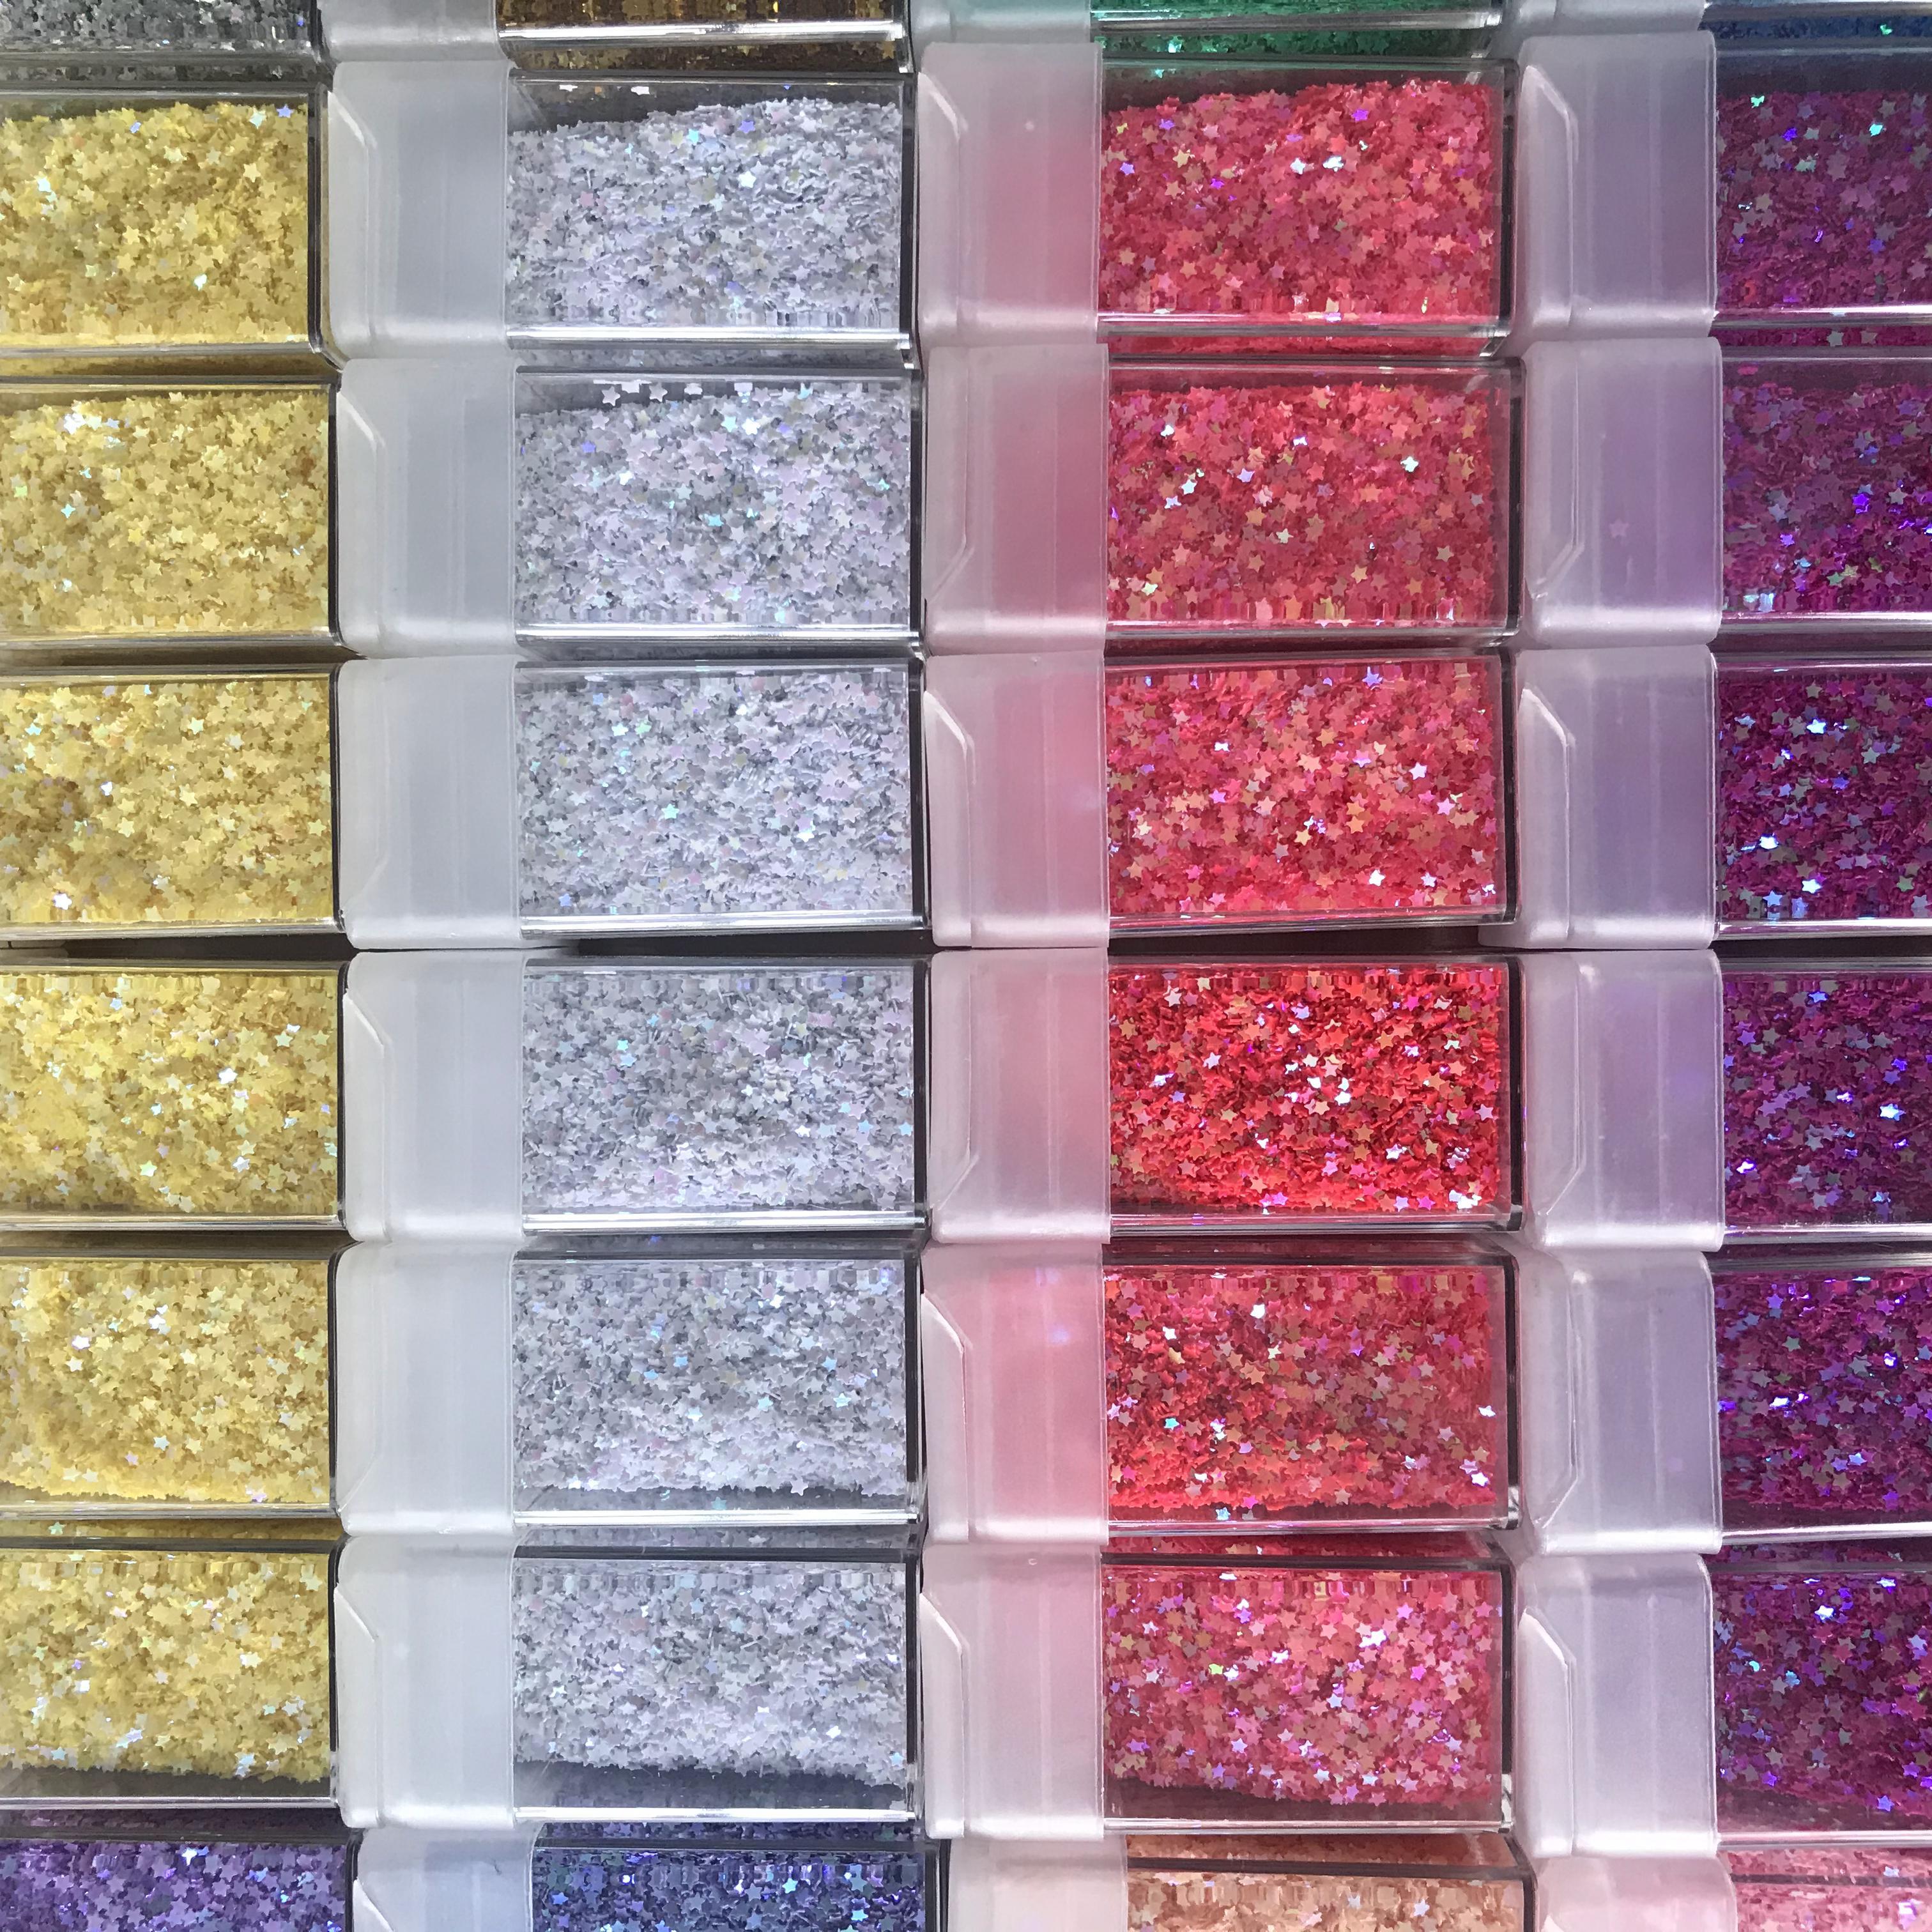  Chunky Glitter for Resins Crafts,3mm Red Stars Shapes